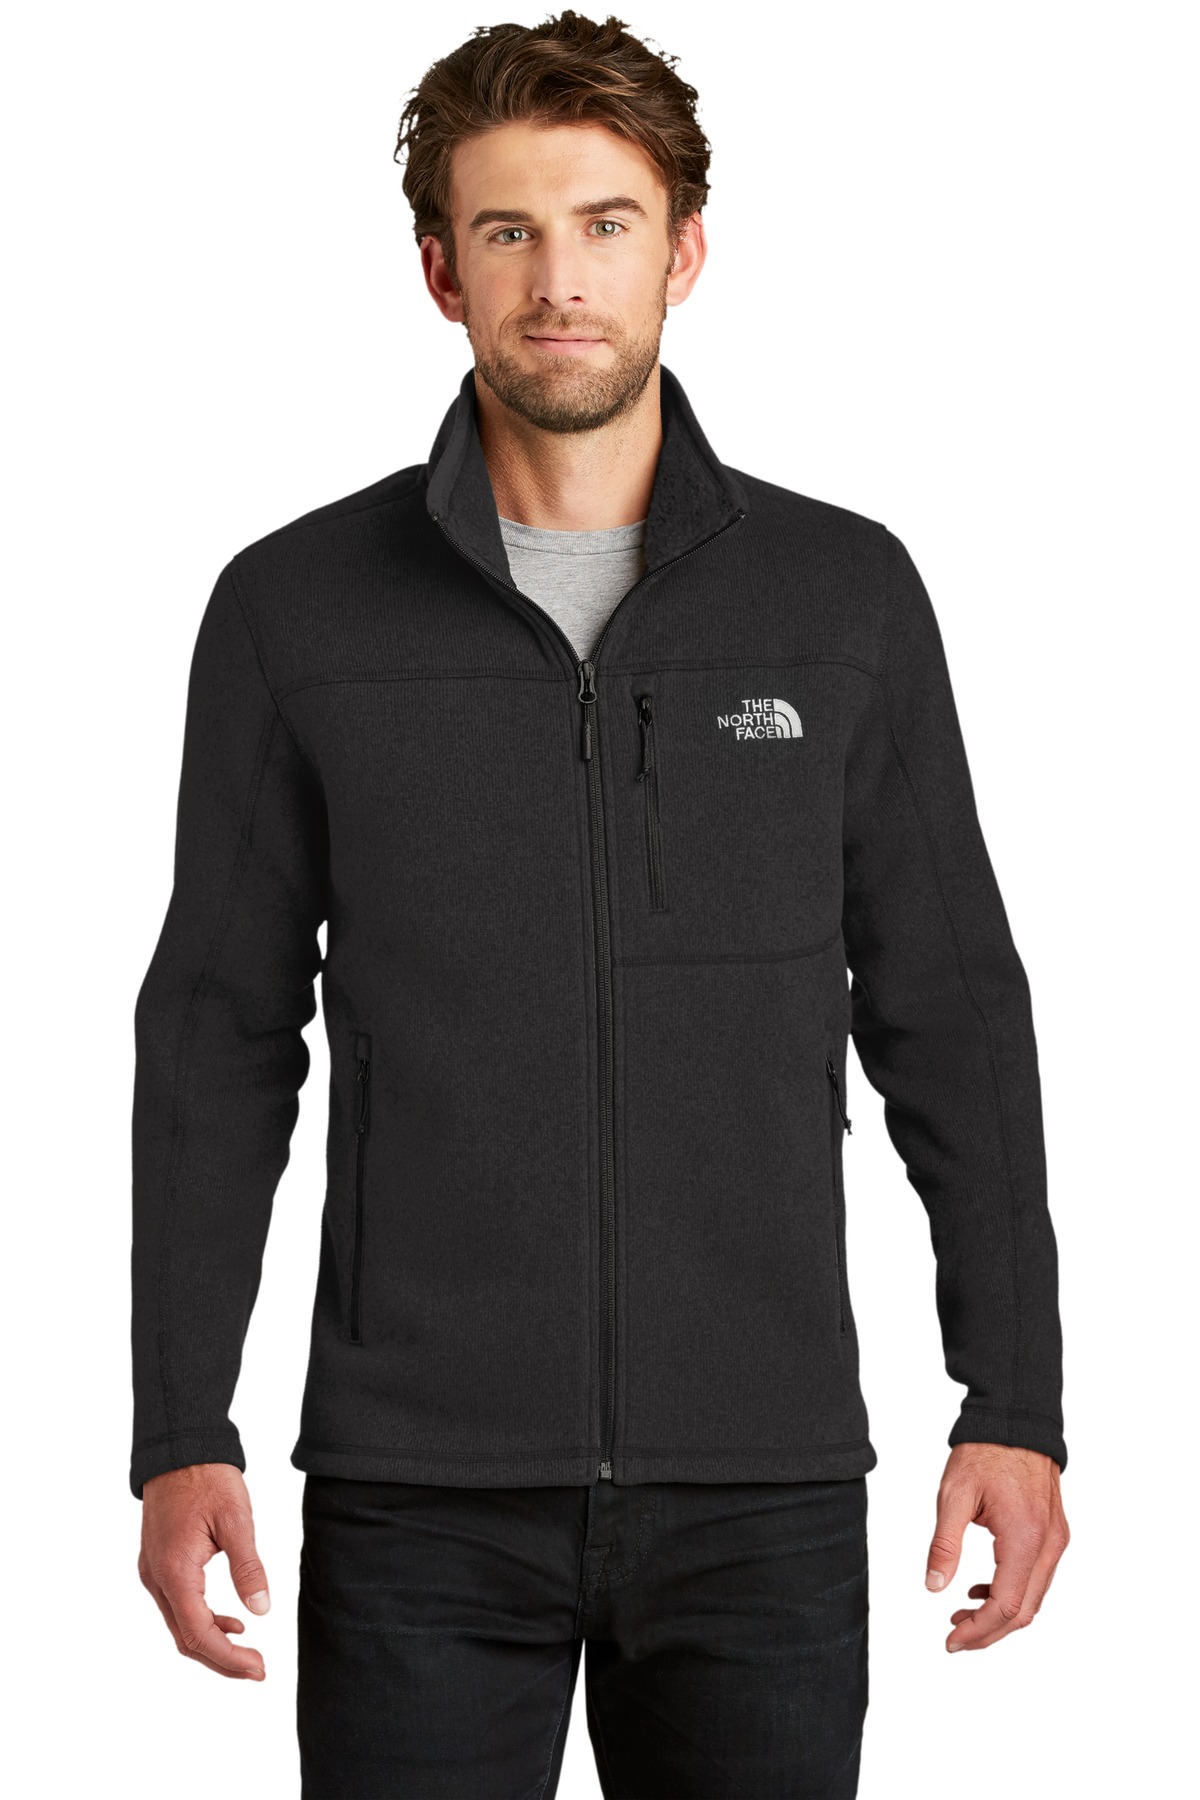 The North Face Outerwear for Corporate & Hospitality ® Sweater Fleece Jacket.-The North Face